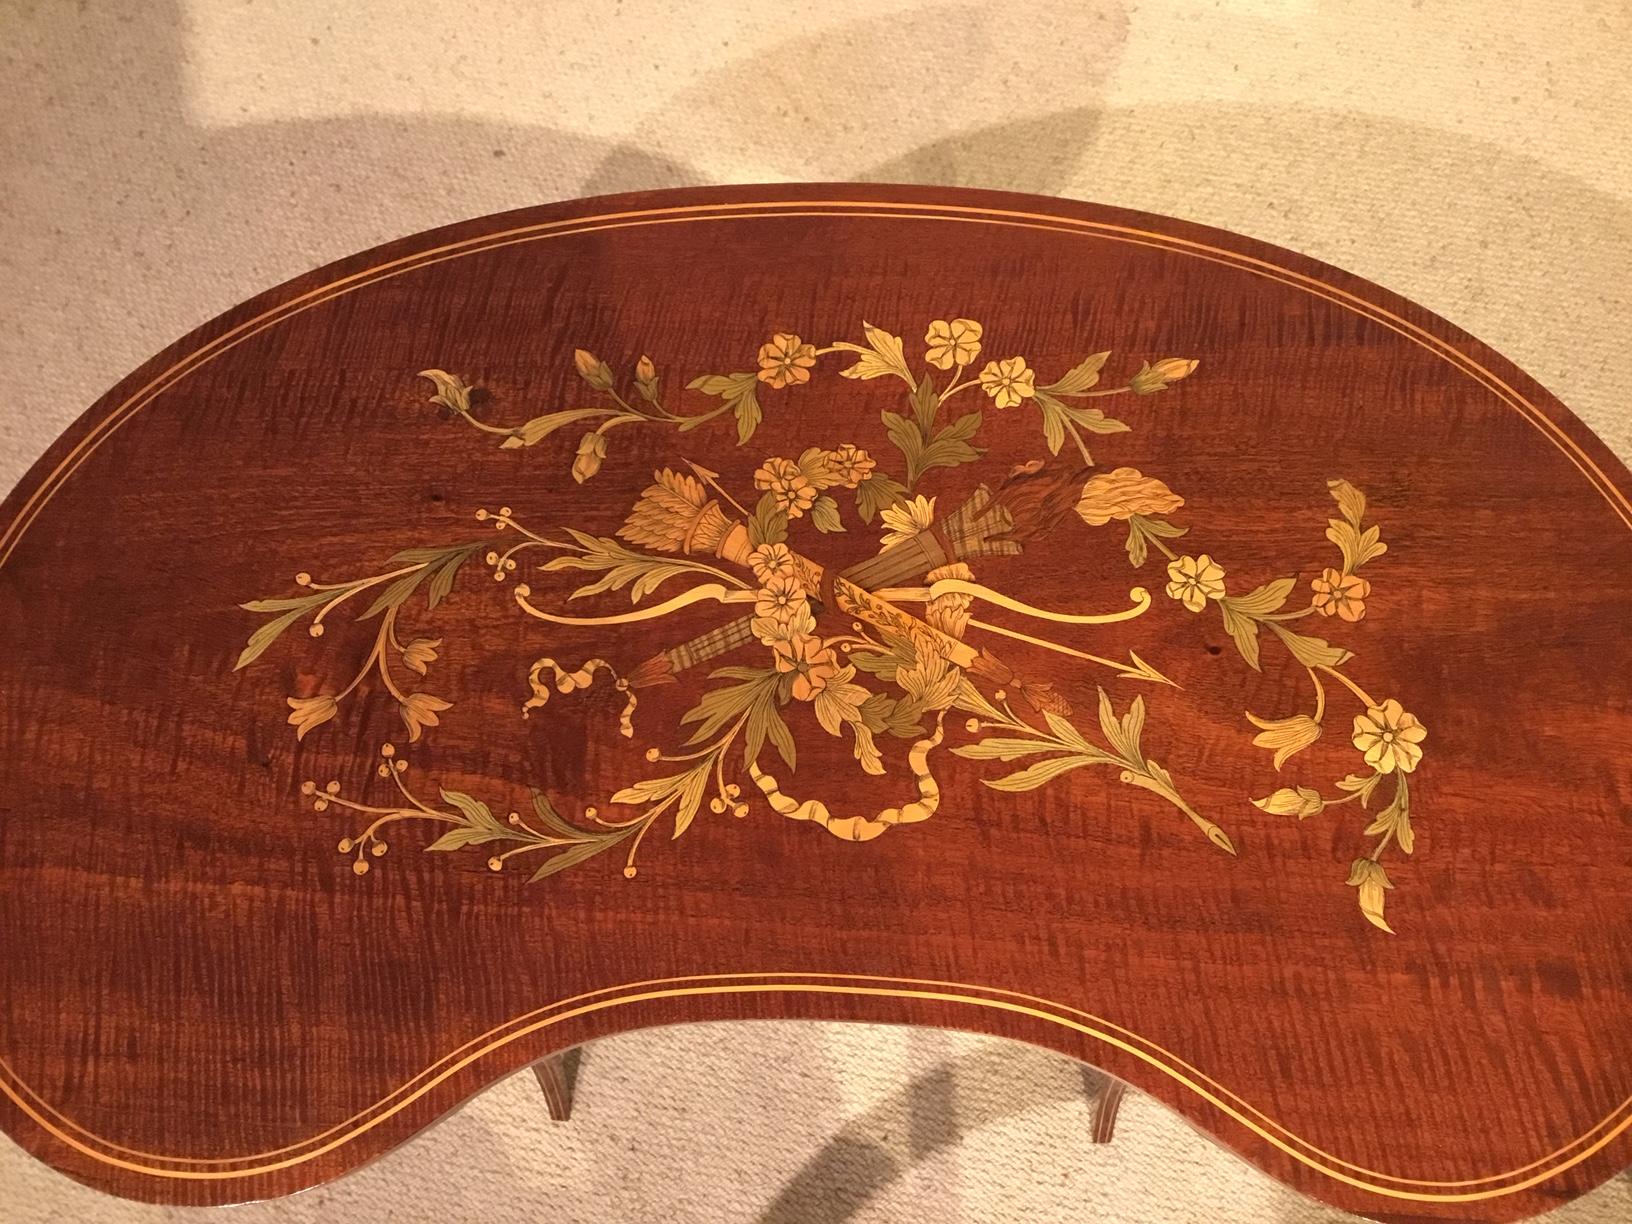 Mahogany Inlaid Edwardian Period Kidney Shaped Occasional Table In Excellent Condition For Sale In Darwen, GB